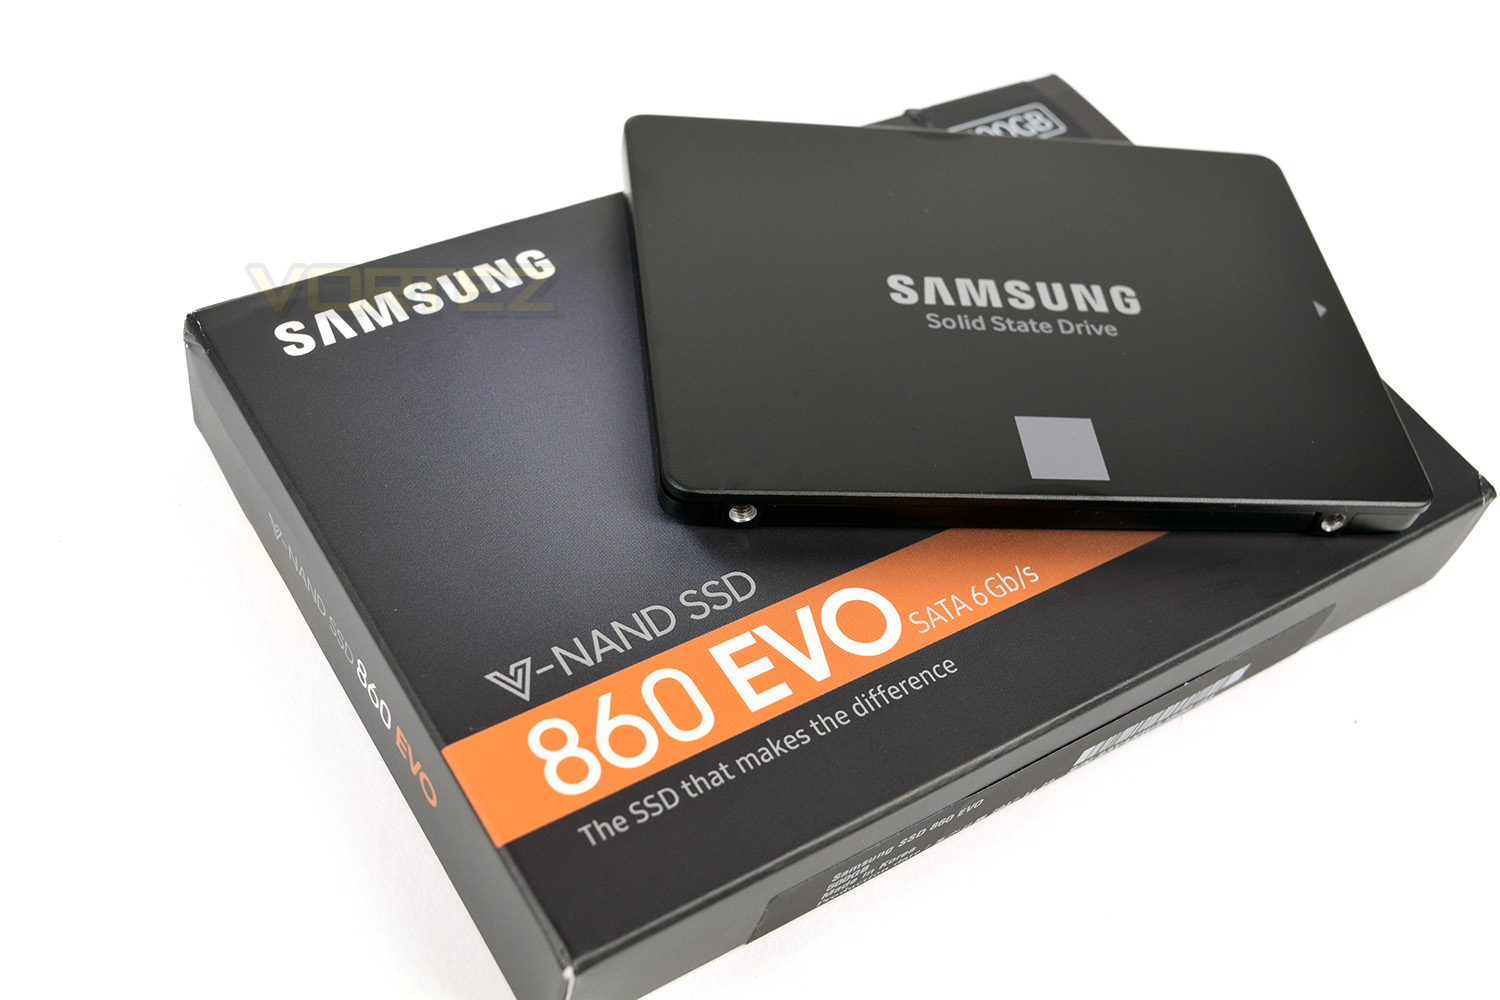 Alligevel Rindende Adept All about the Samsung 860 EVO SATA III SSD - Dignited